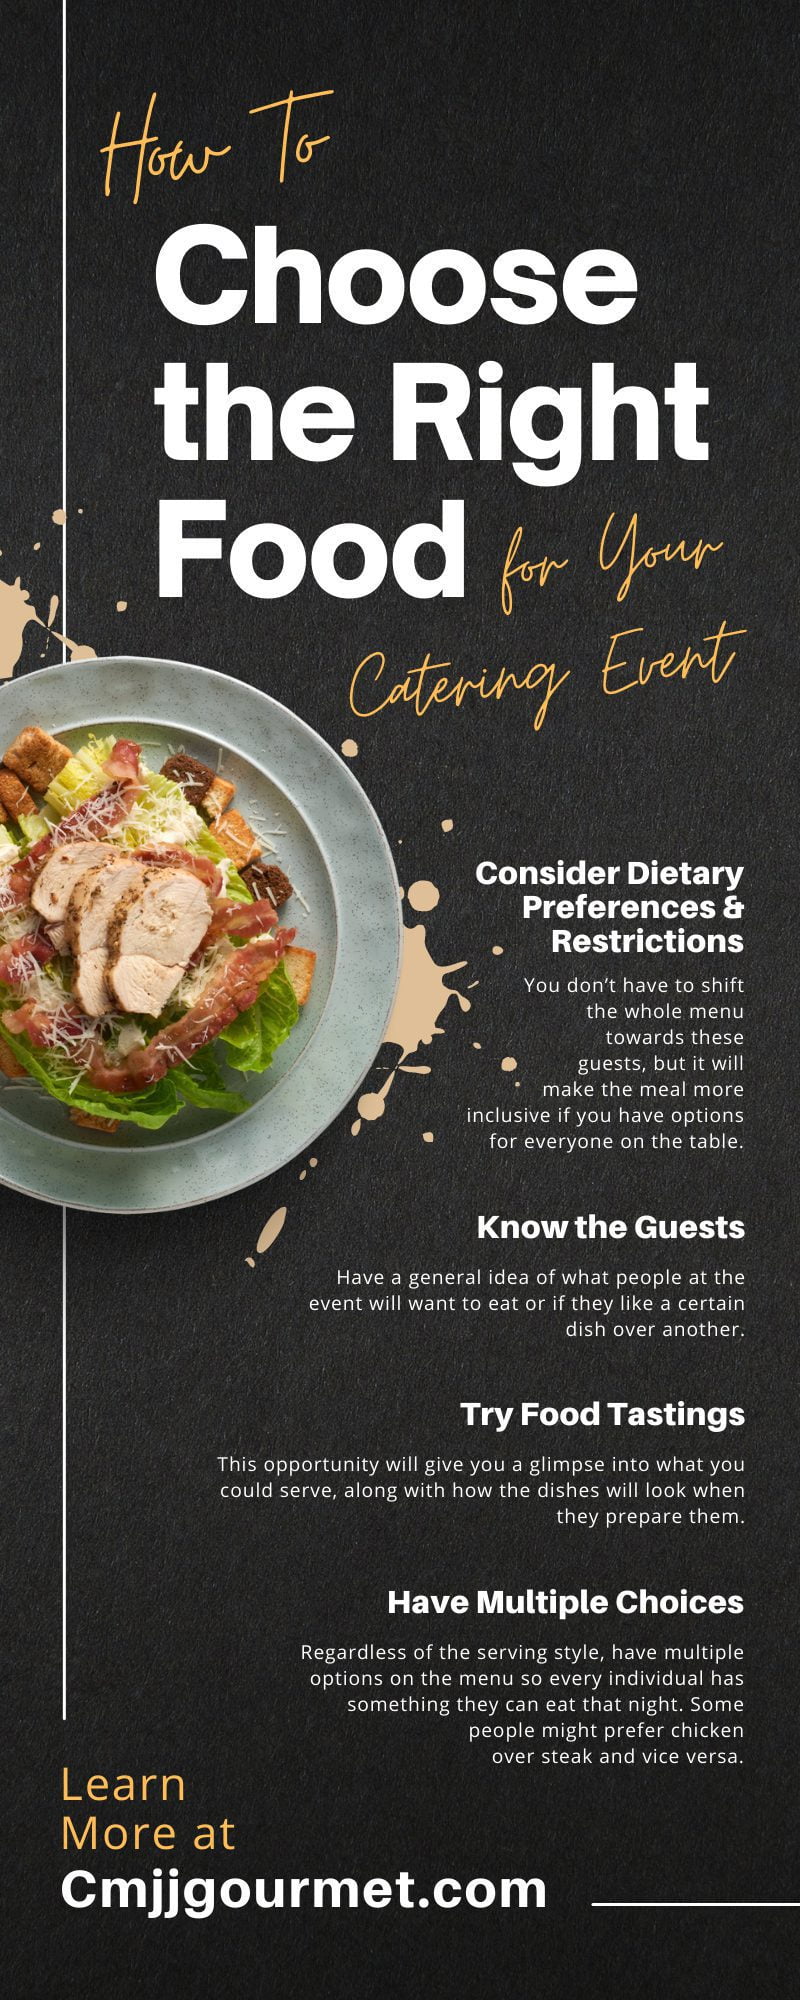 How To Choose the Right Food for Your Catering Event